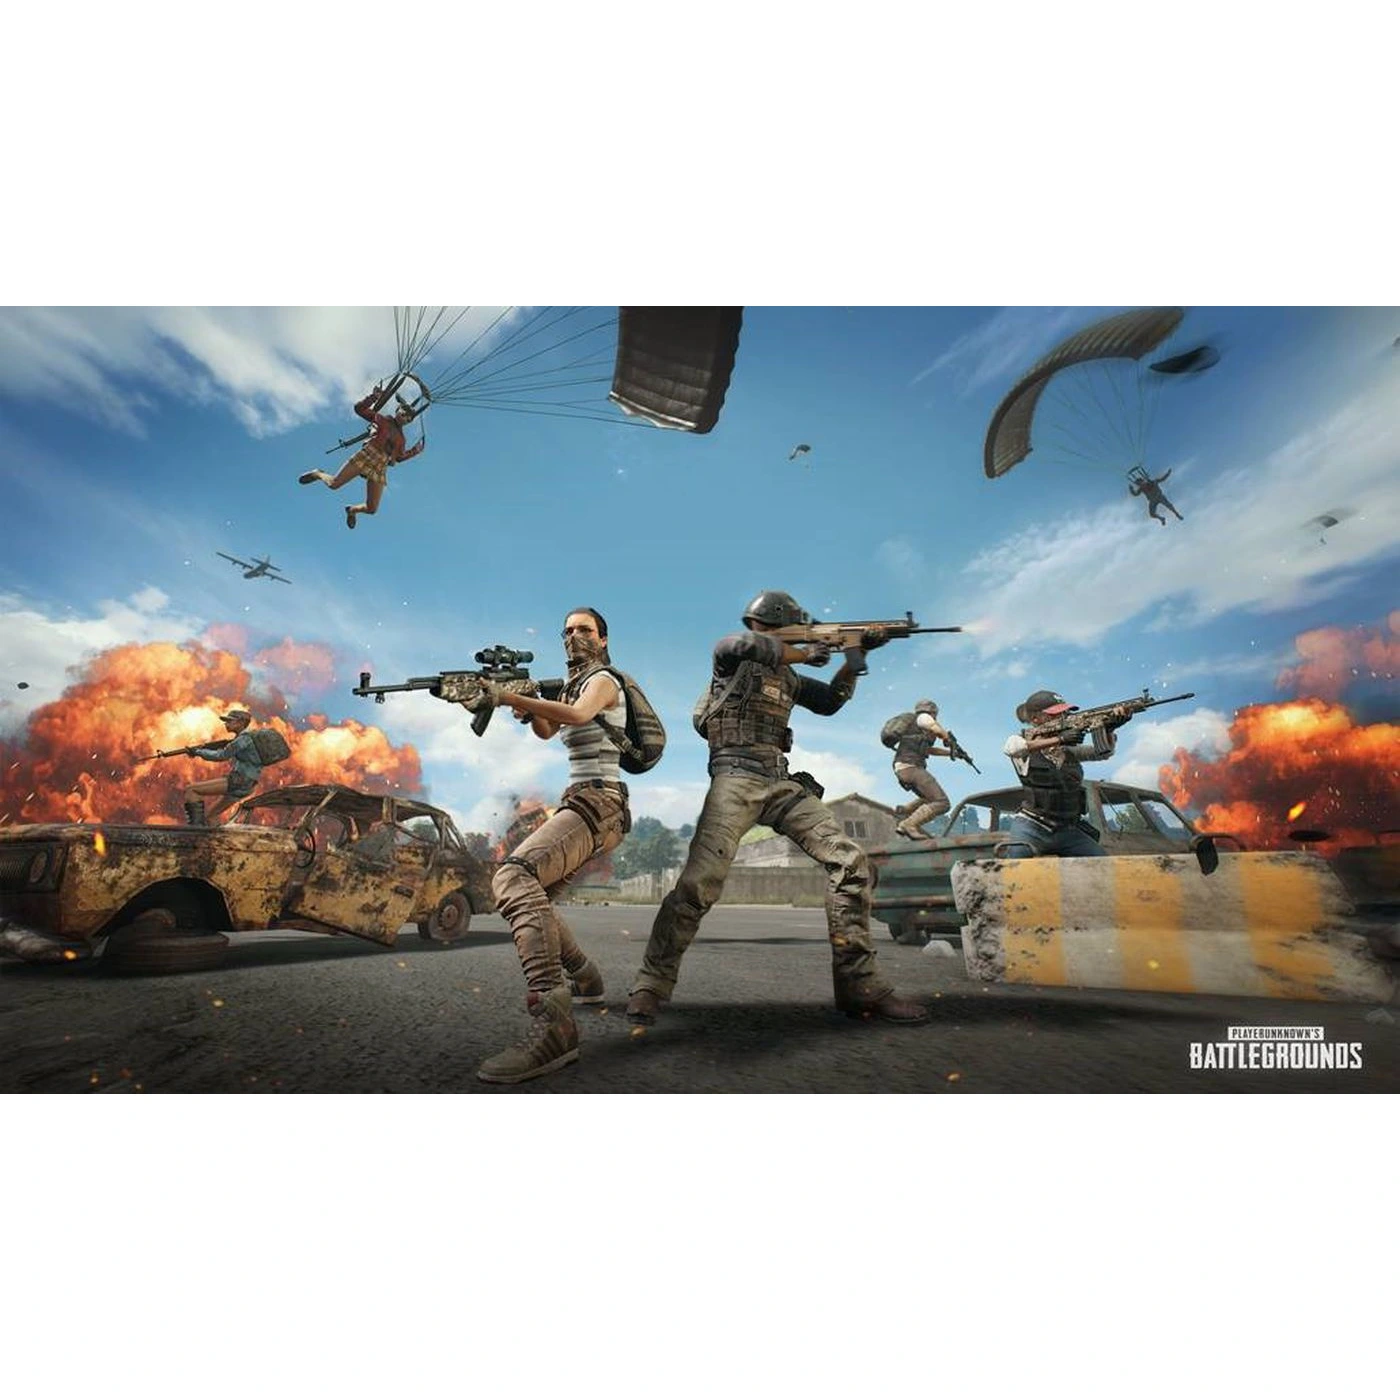 Buy Playerunknow's Battleground CD Games for Xbox One Online in Dubai & the  UAE|Toys 'R' Us